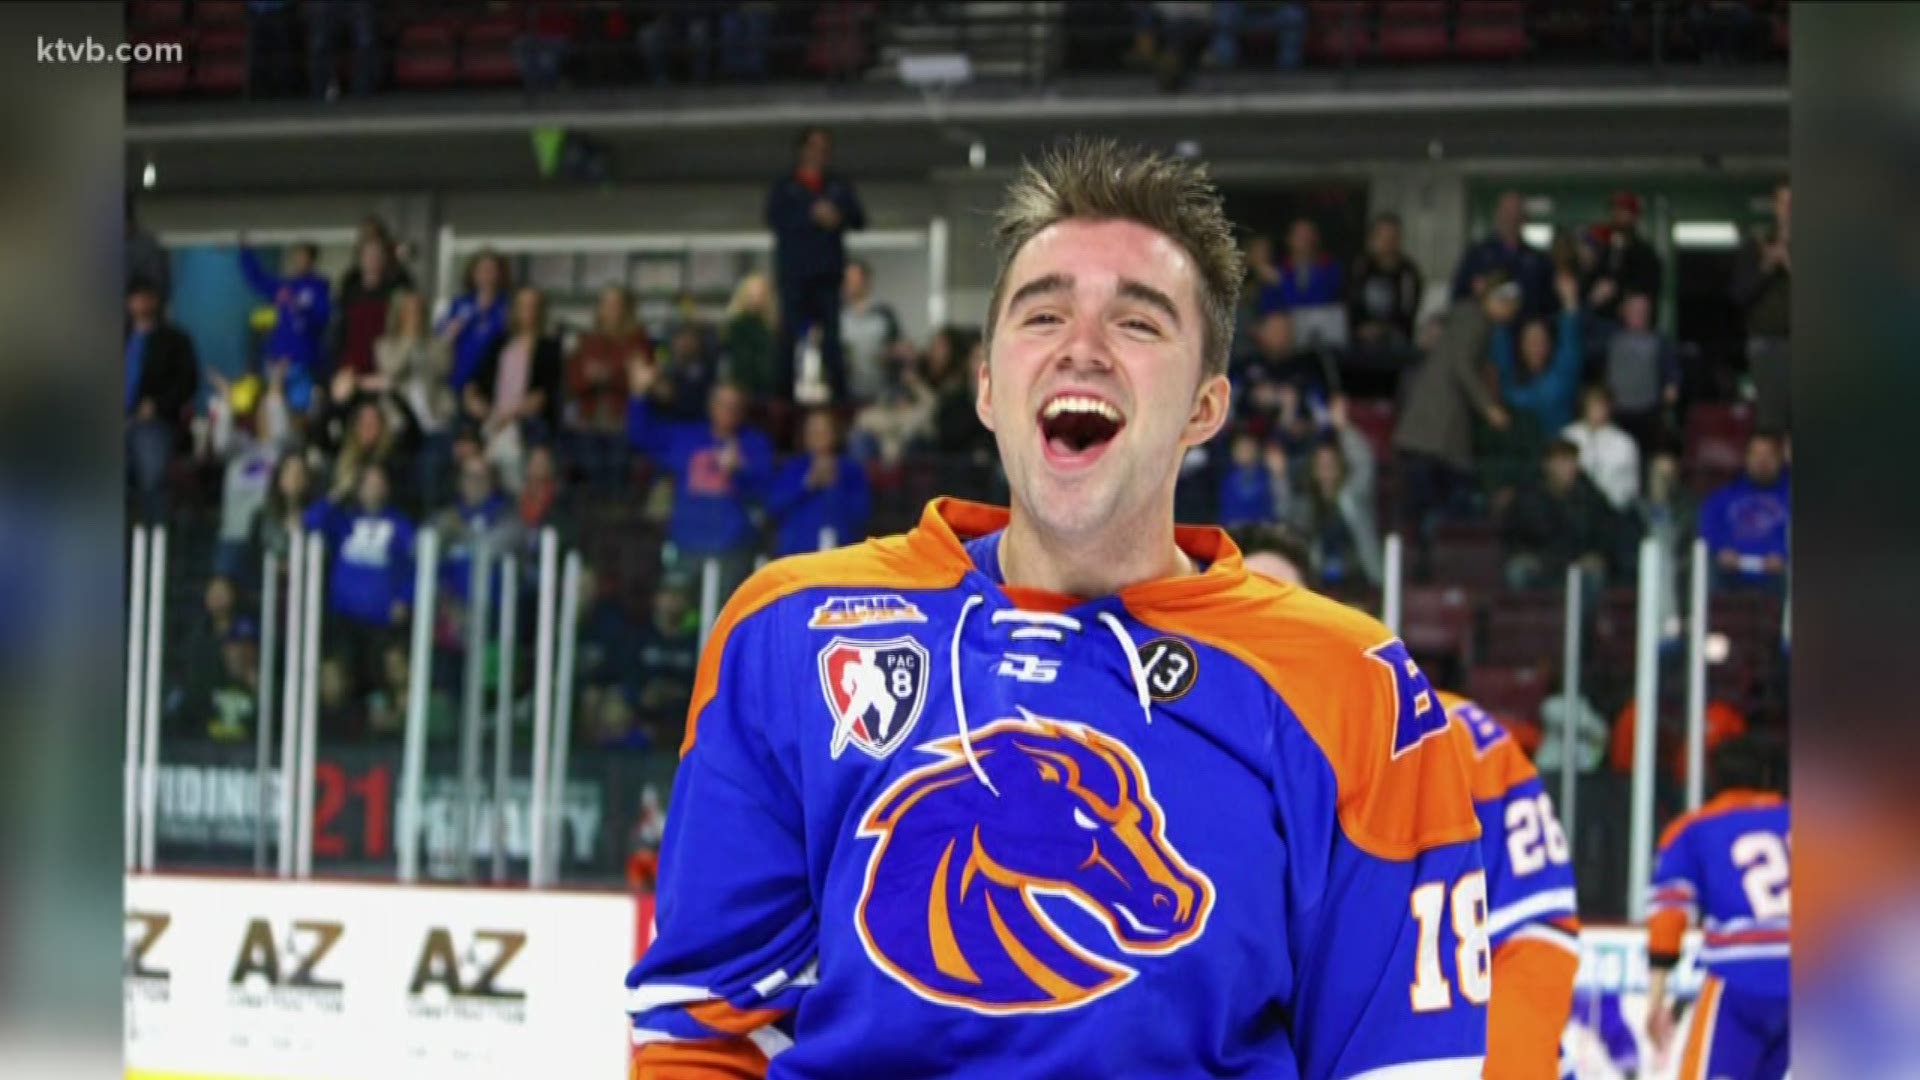 The Boise State hockey community is calling it a tragic accident. This past Friday, Boise police say 22-year-old Robert "Bobby" Skinner died from a single gunshot wound. While they are still investigating the shooting, police say there was no crime committed.